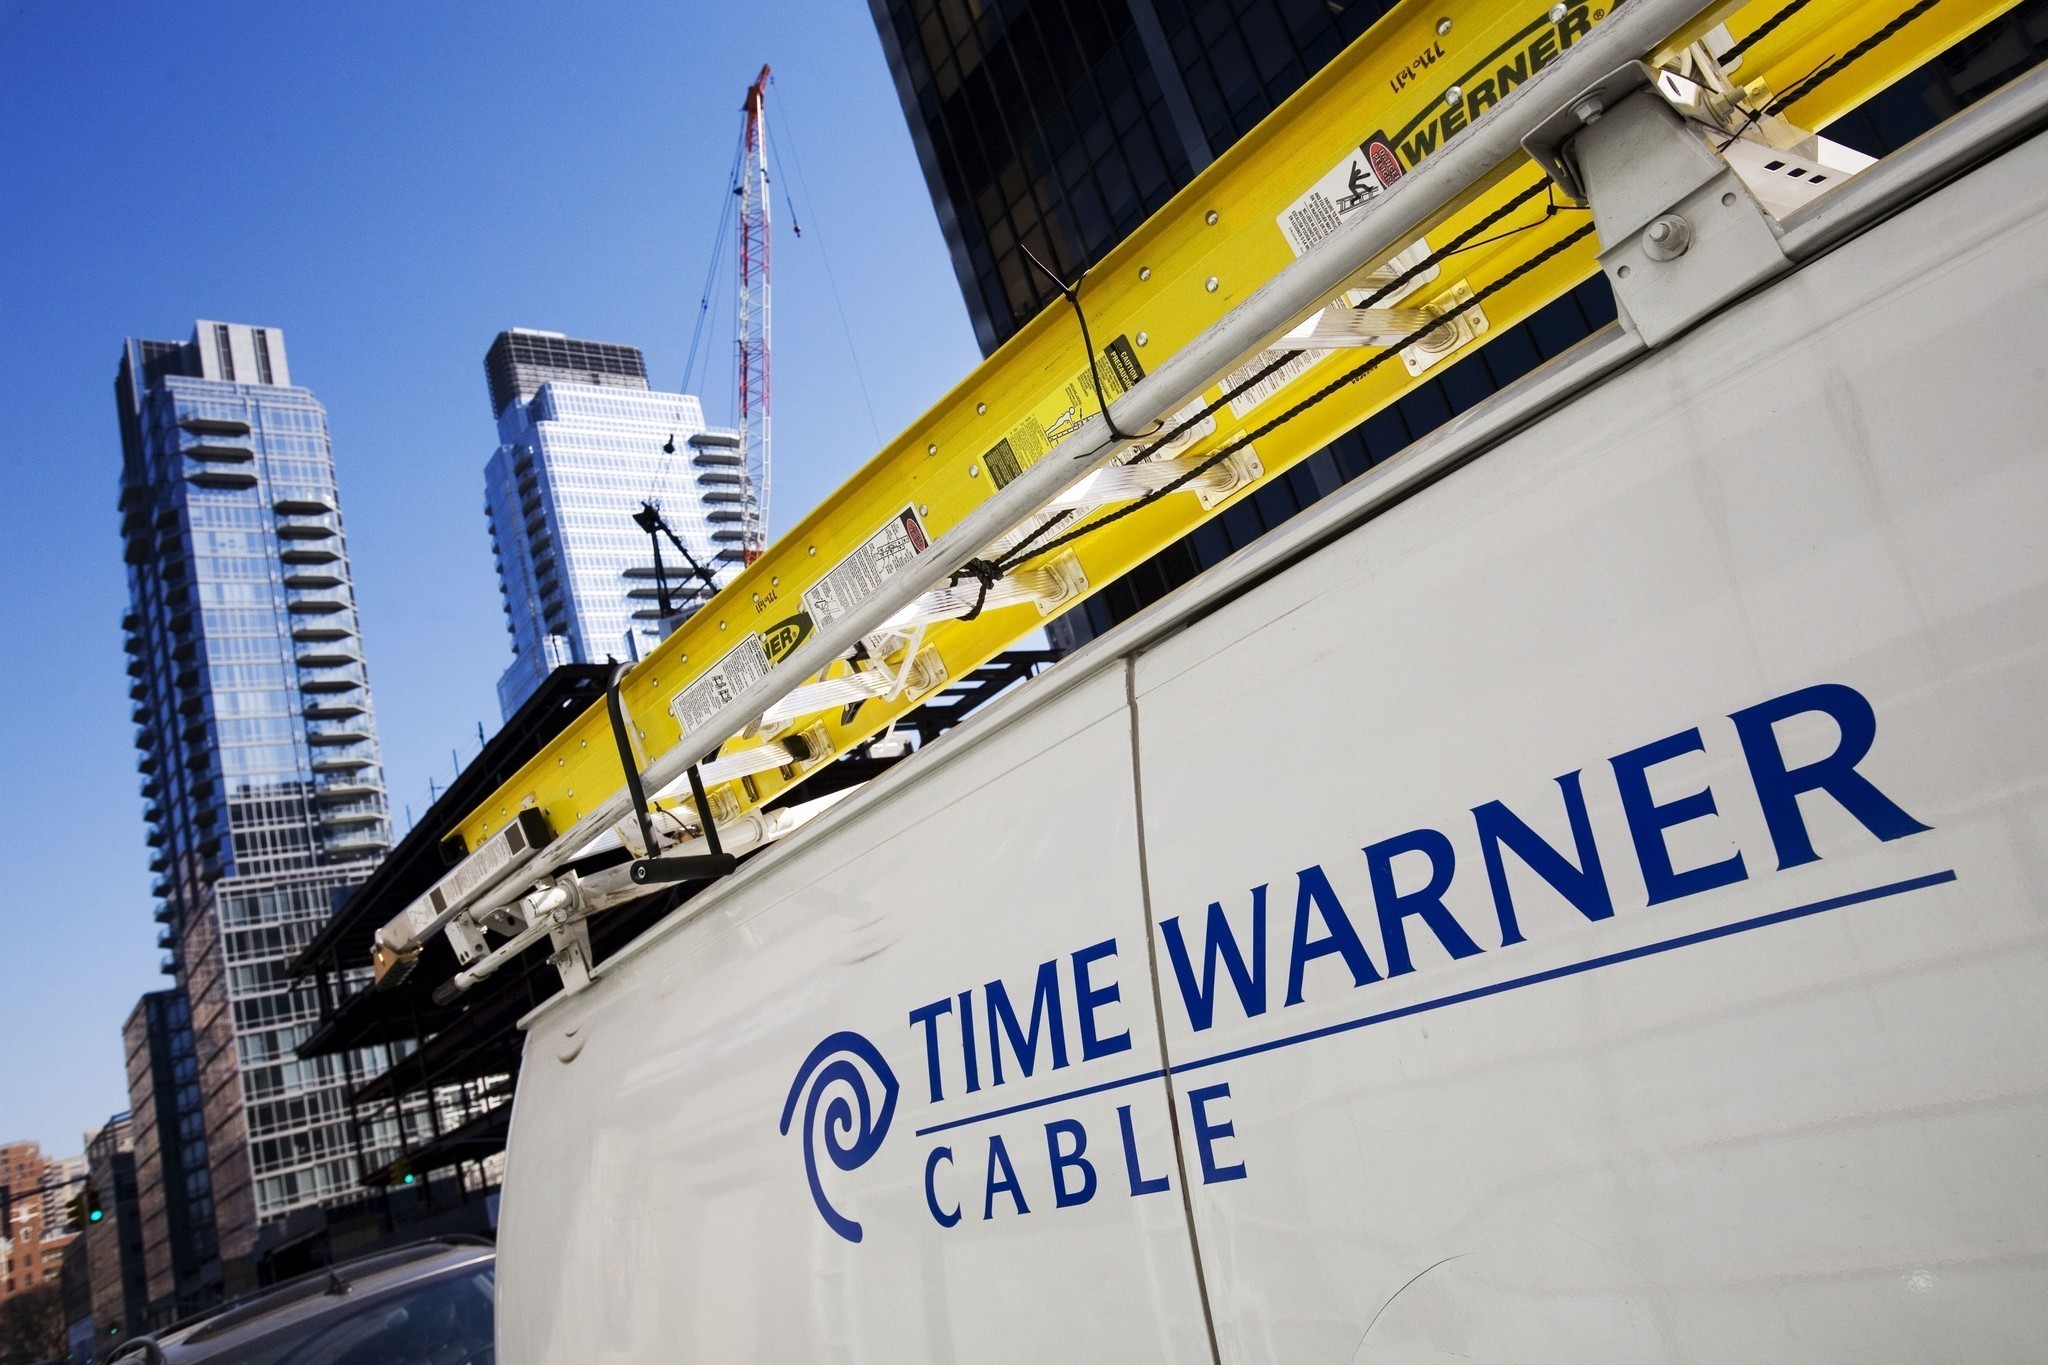 The Best Time Warner Cable Modems Of 2015